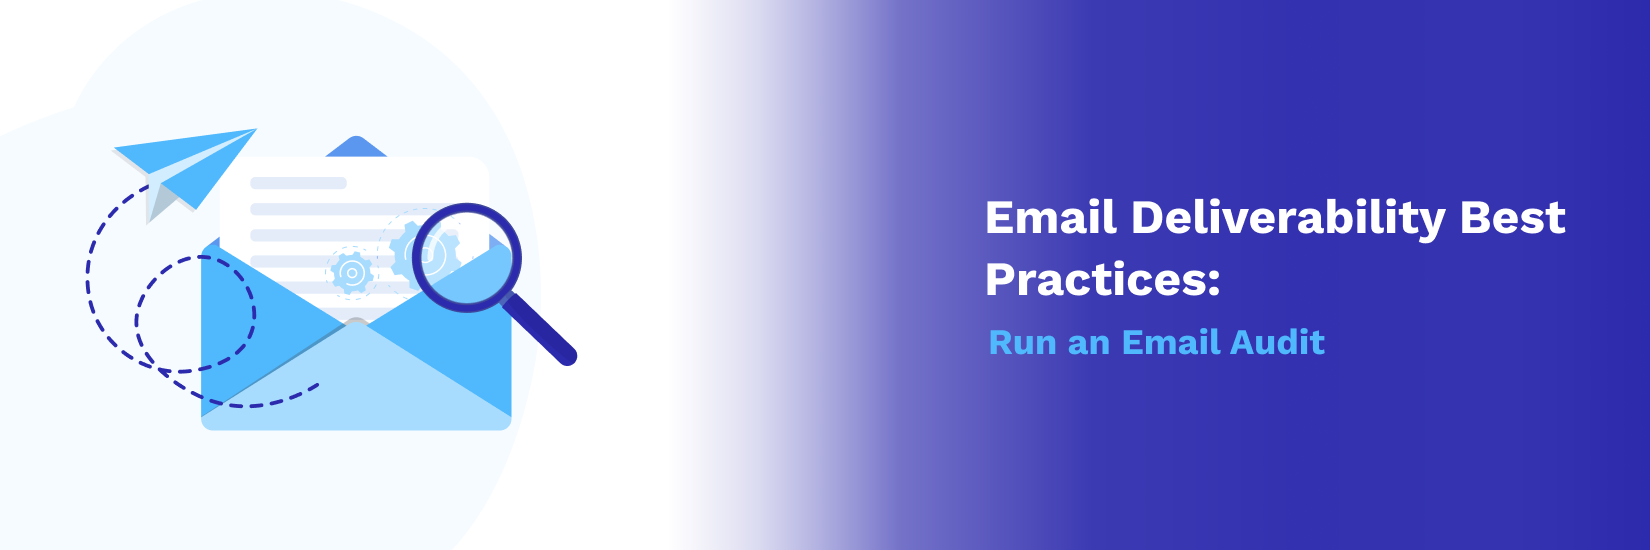 Email Best Practices: Email Deliverability Audit